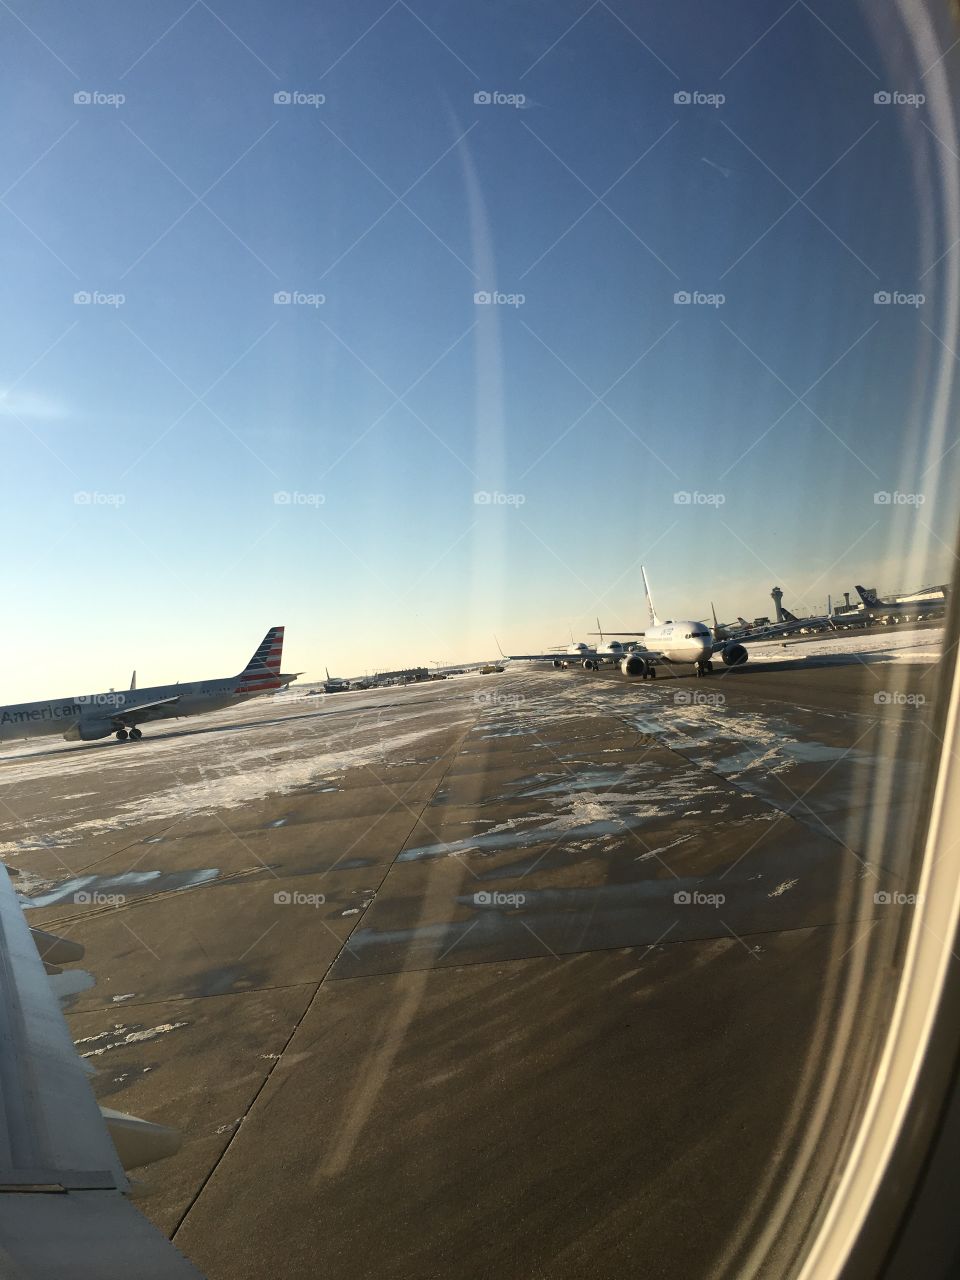 View from a plane window waiting to take off from the runway. There are a few planes on the runway waiting to take off. There are some ice from snow on the road.